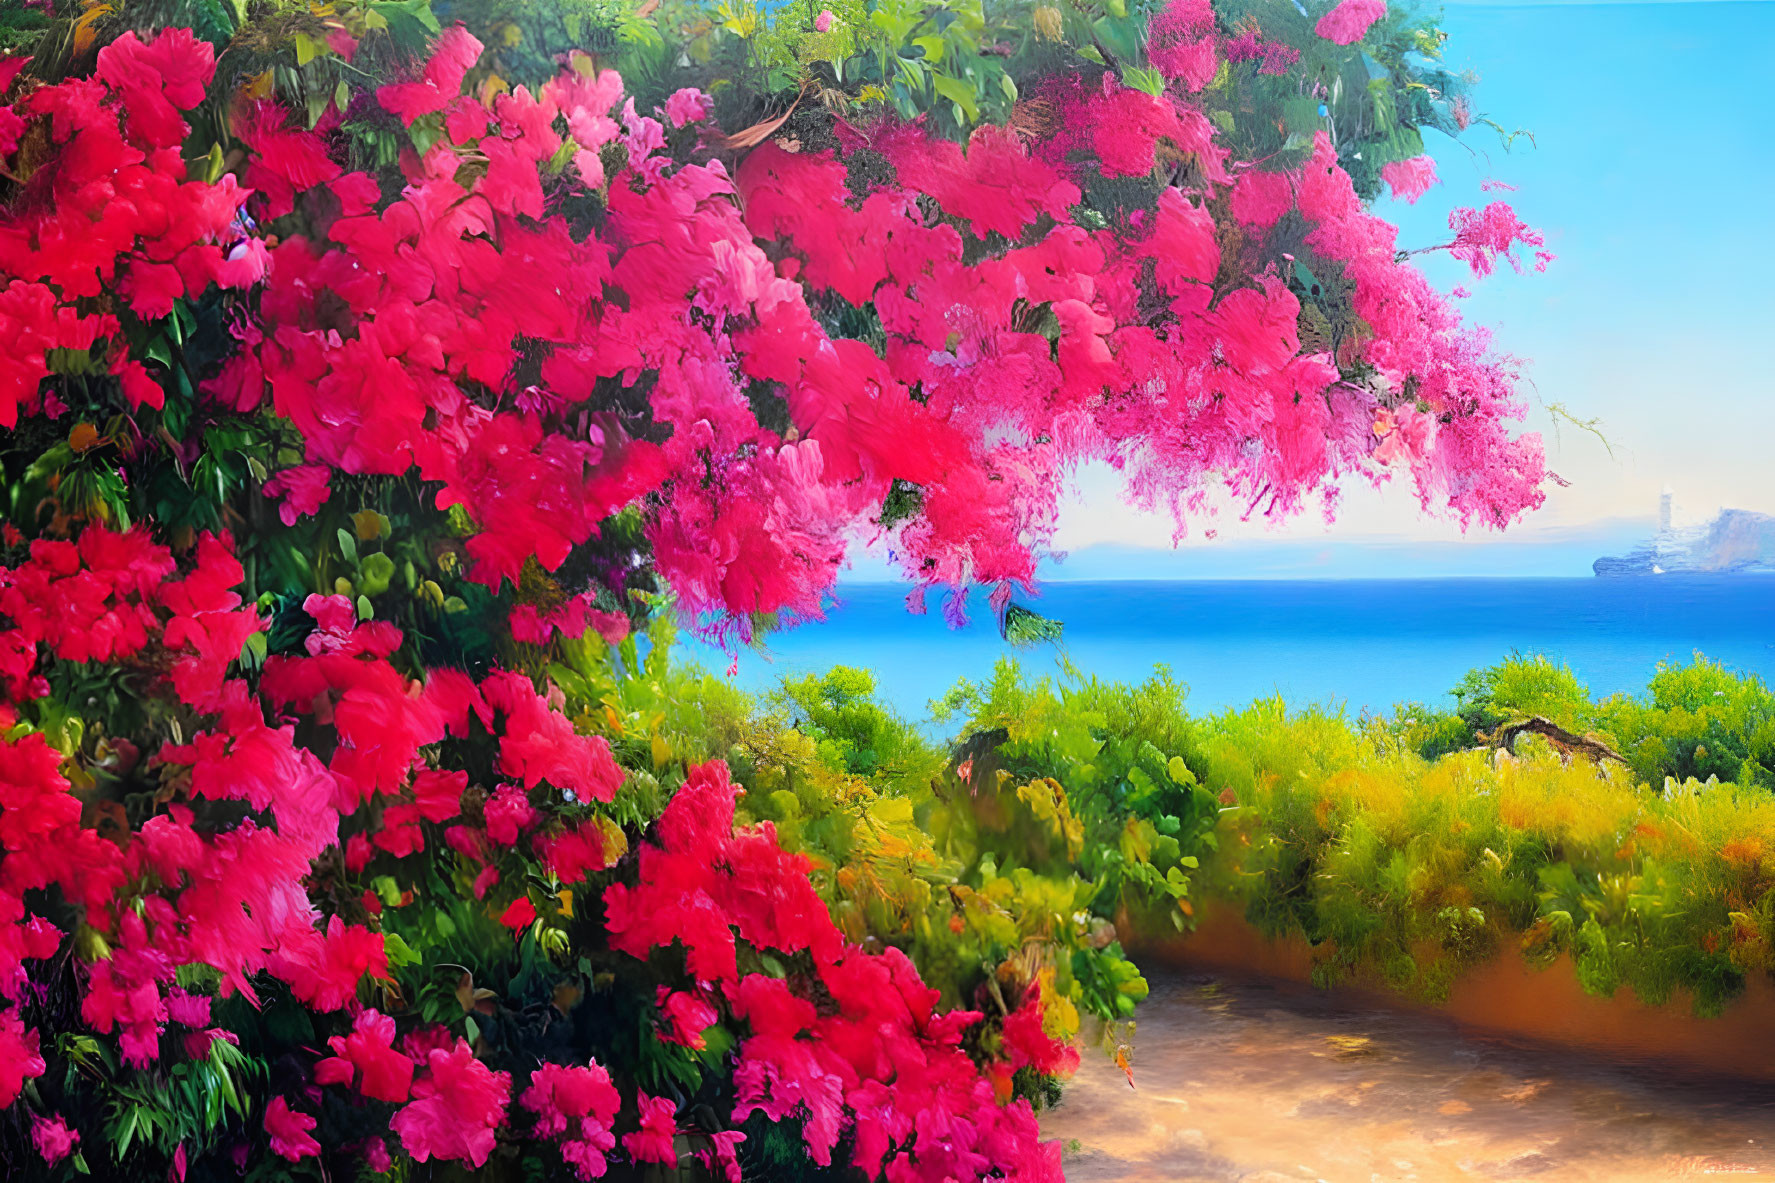 Pink Flowers Blooming on Trees by Blue Sea